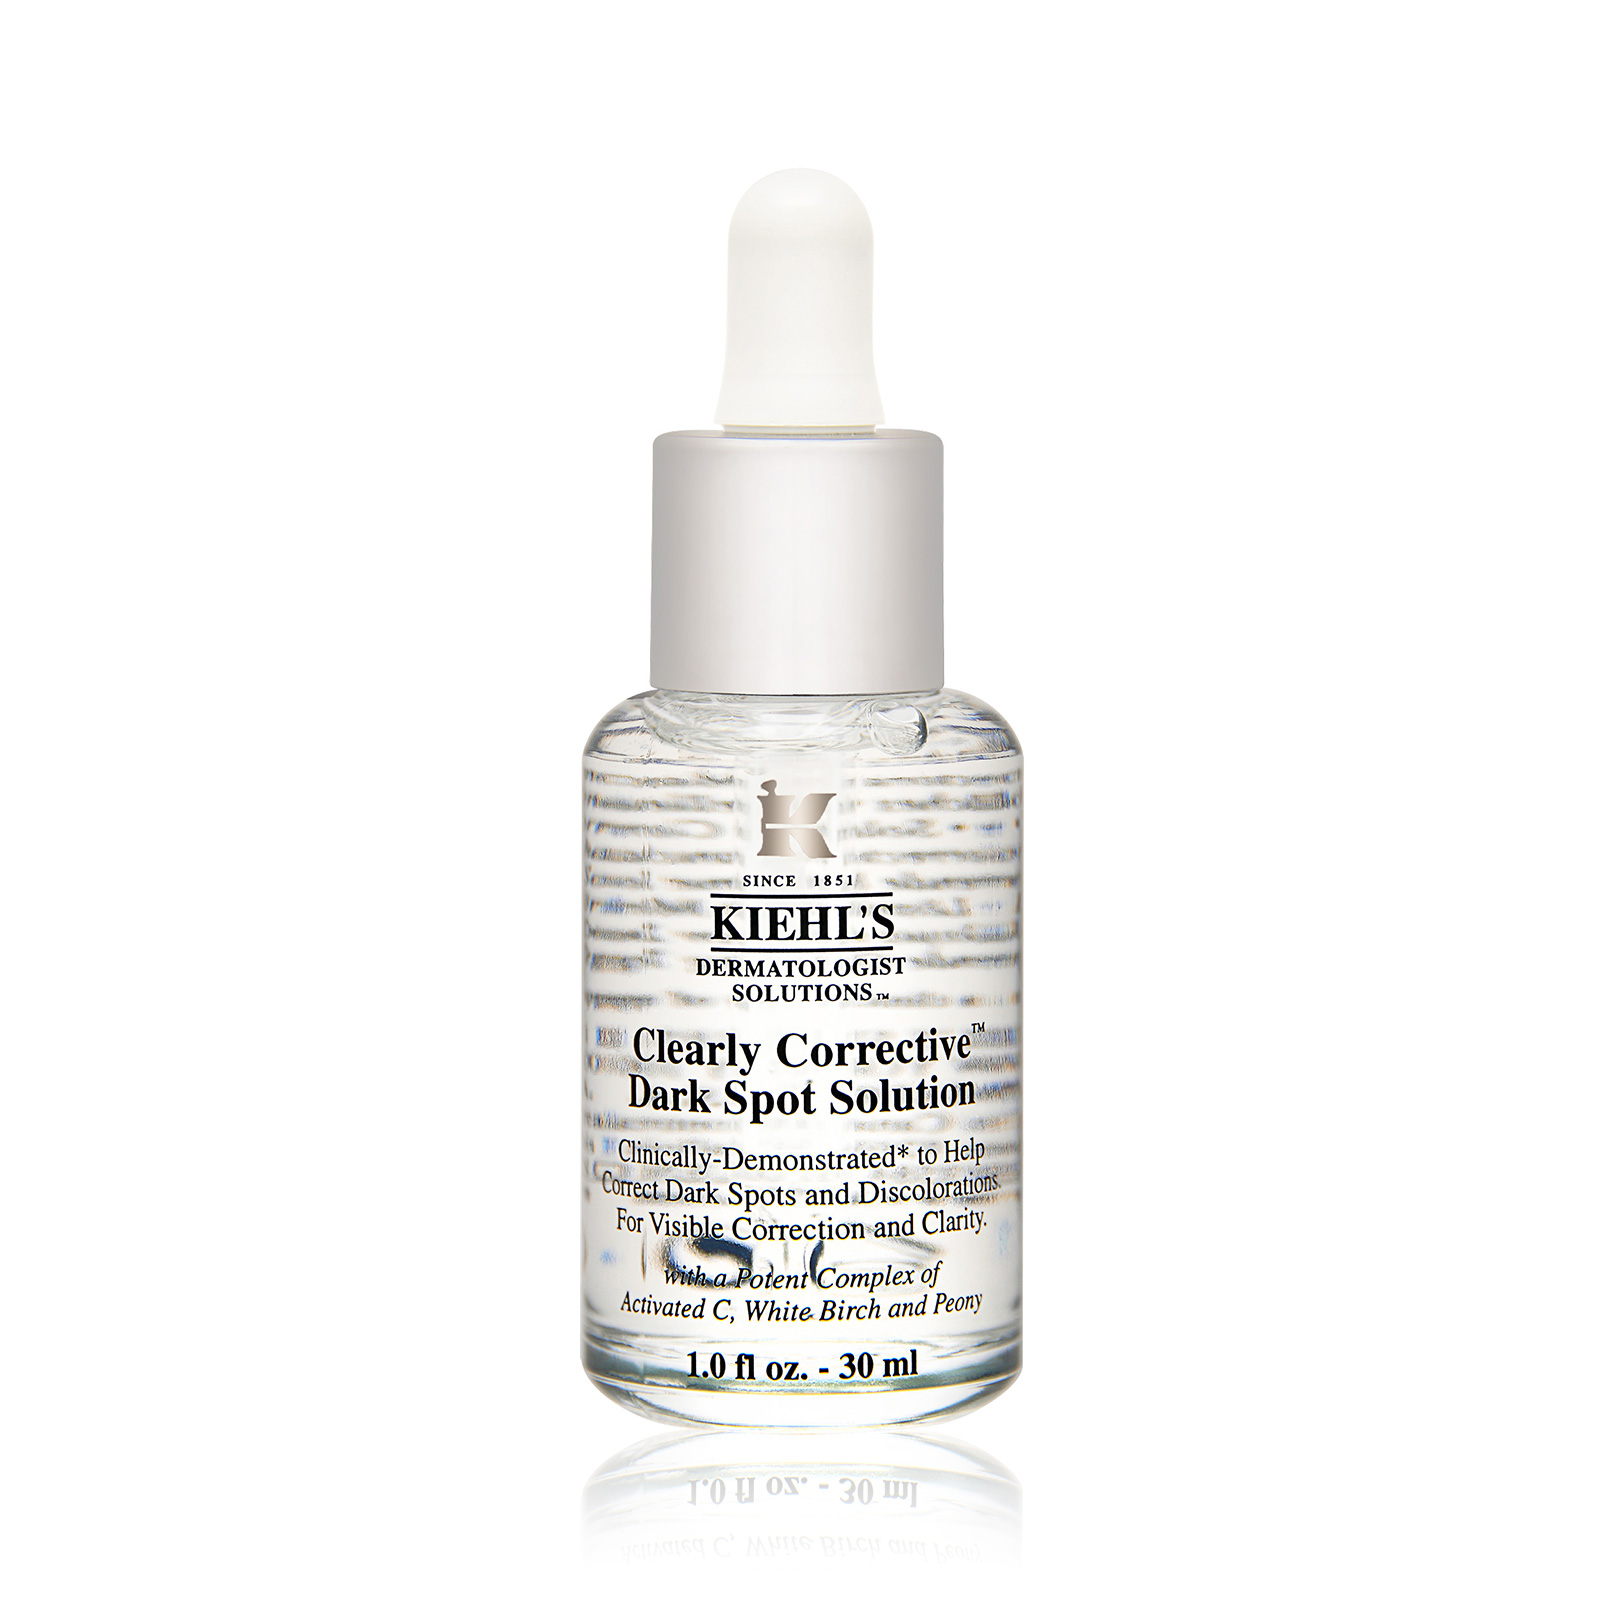 Dermatologist Solutions Clearly Corrective Dark Spot Solution